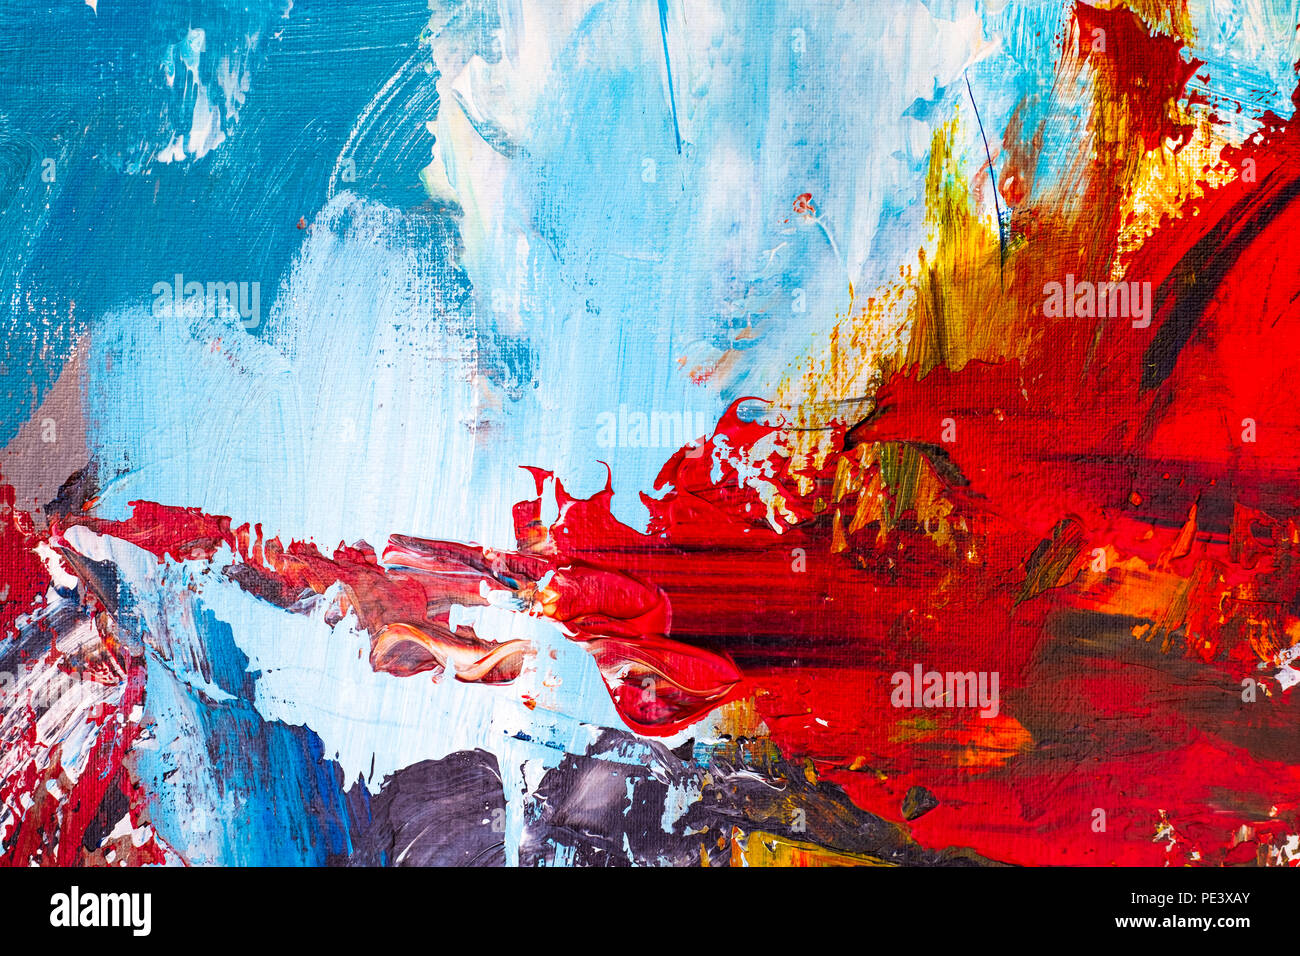 Abstract art background. Oil painting on canvas. Multicolored bright texture. Fragment of artwork. Brushstrokes of paint. Modern art. Stock Photo